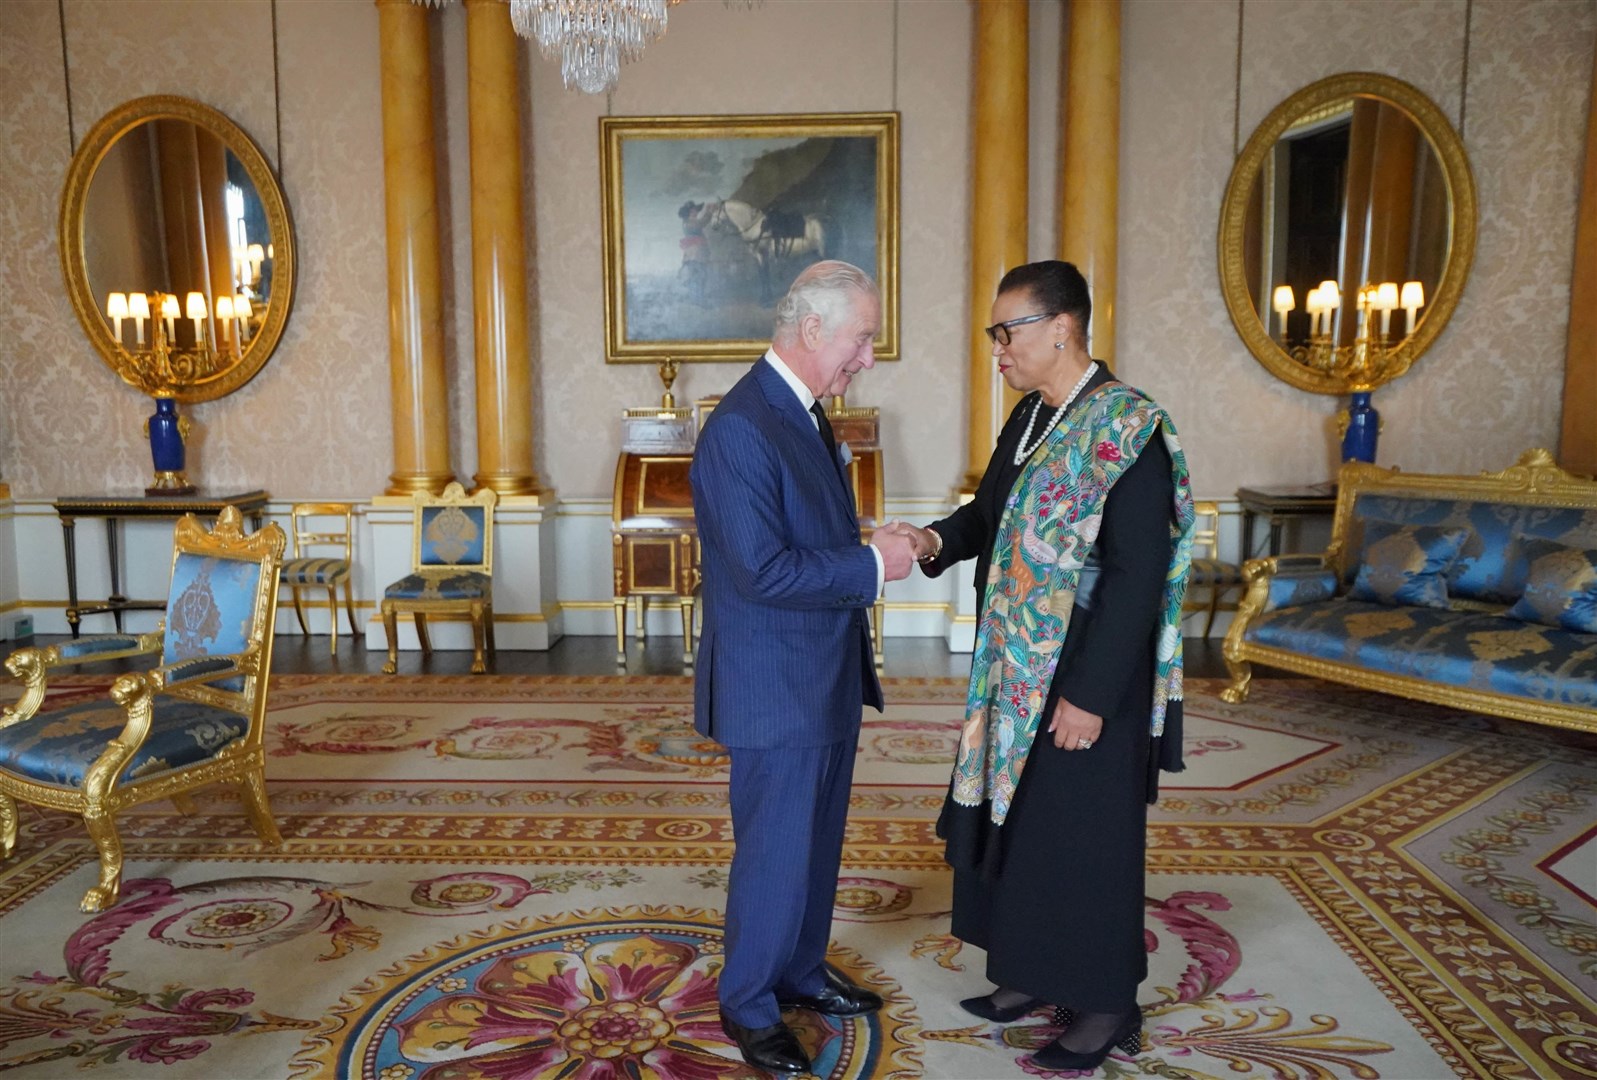 King Charles III during an audience with the Commonwealth secretary general Baroness Patricia Scotland at Buckingham Palace on Sunday (Victoria Jones/PA)